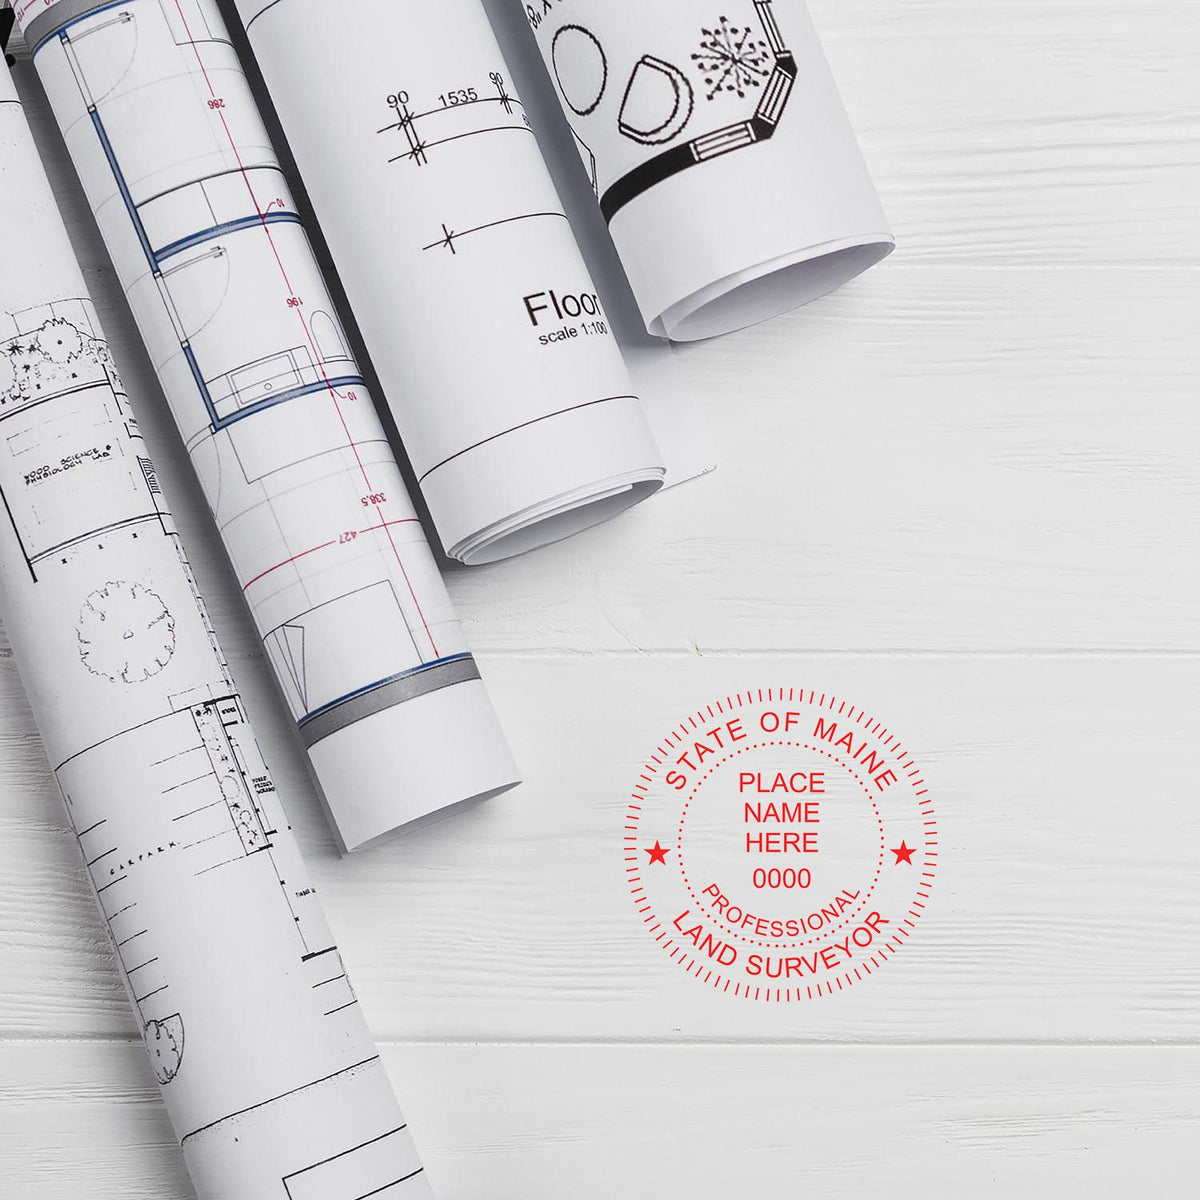 The Slim Pre-Inked Maine Land Surveyor Seal Stamp stamp impression comes to life with a crisp, detailed photo on paper - showcasing true professional quality.